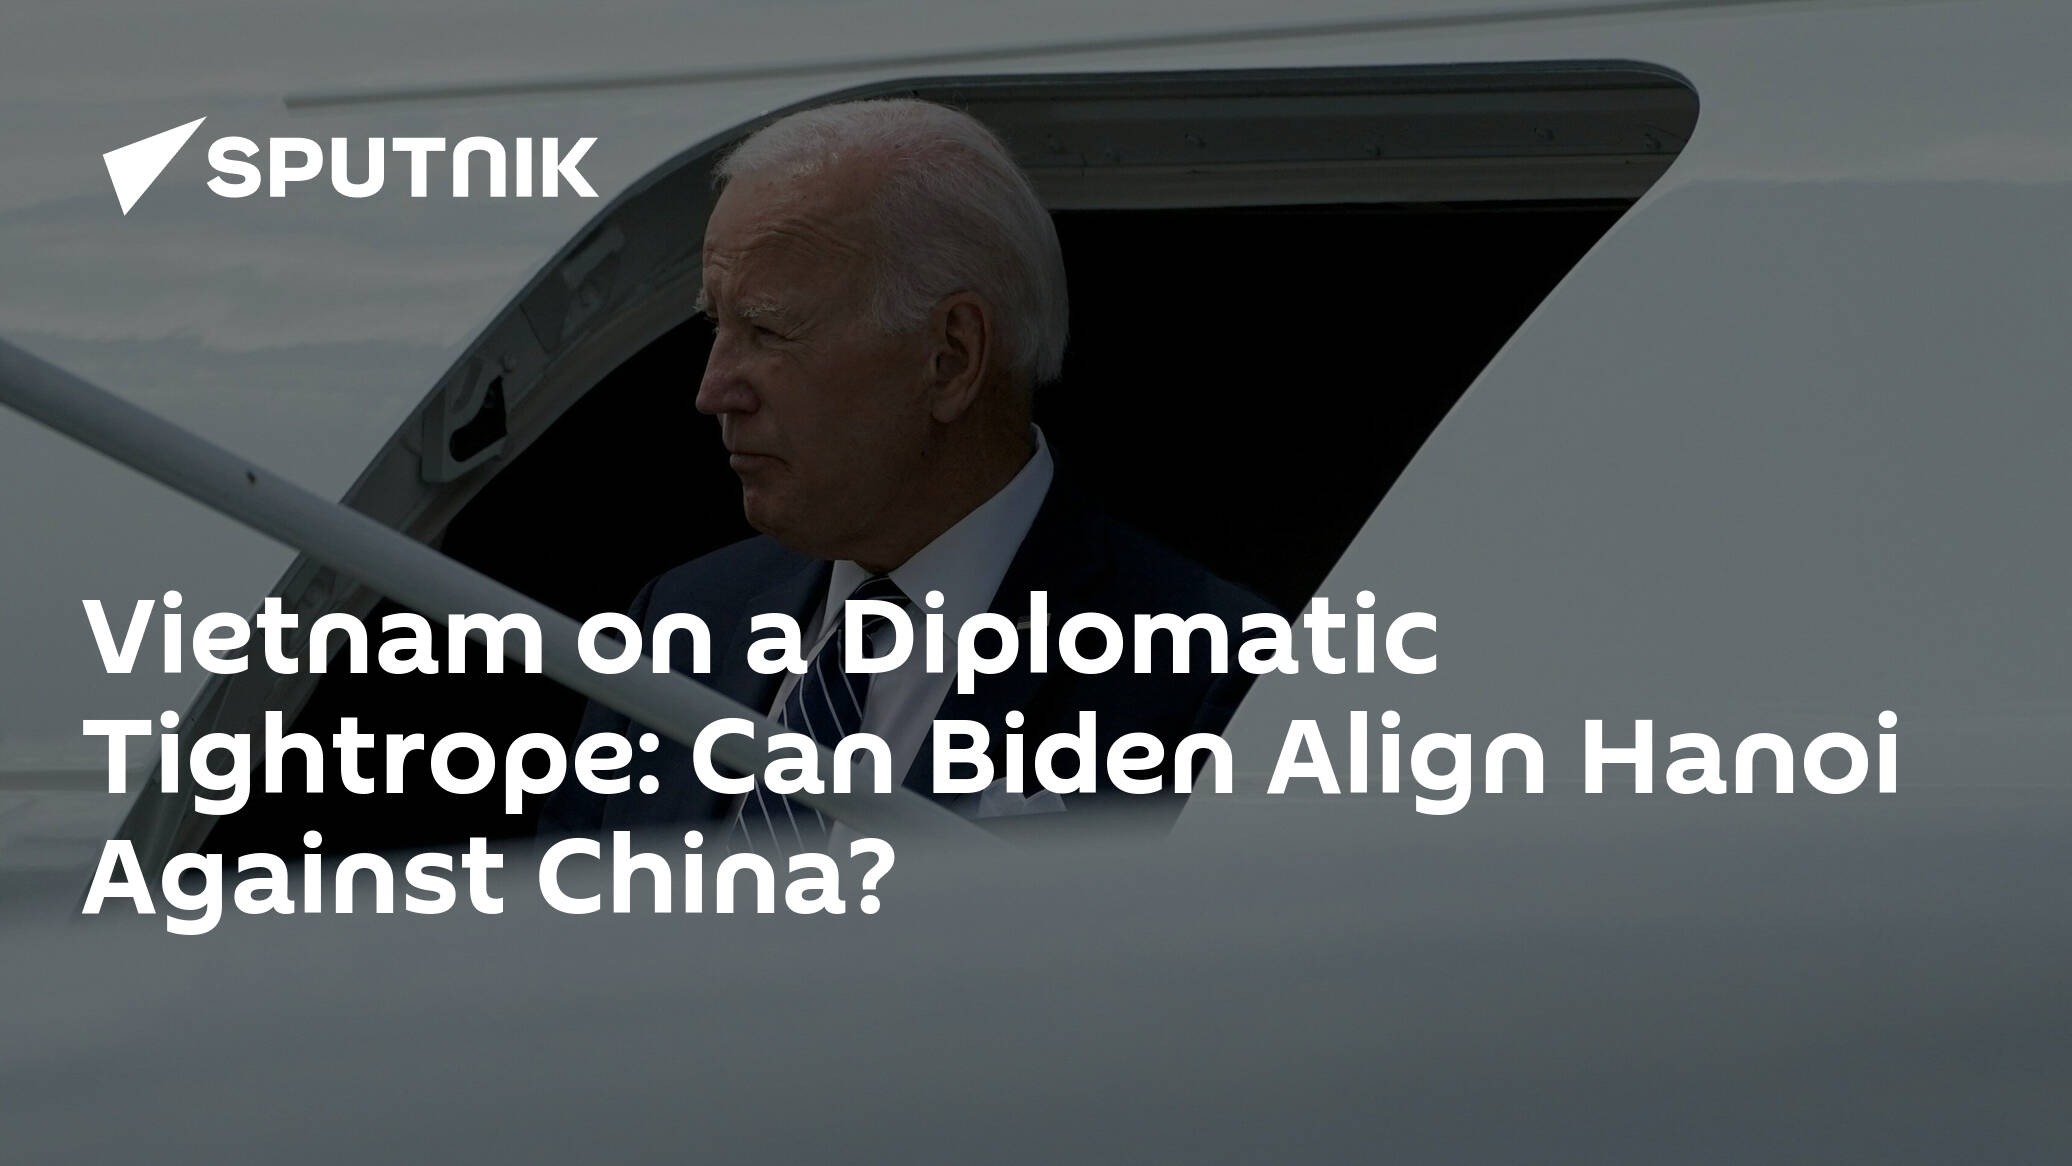 Vietnam on a Diplomatic Tightrope: Can Biden Align Hanoi Against China?